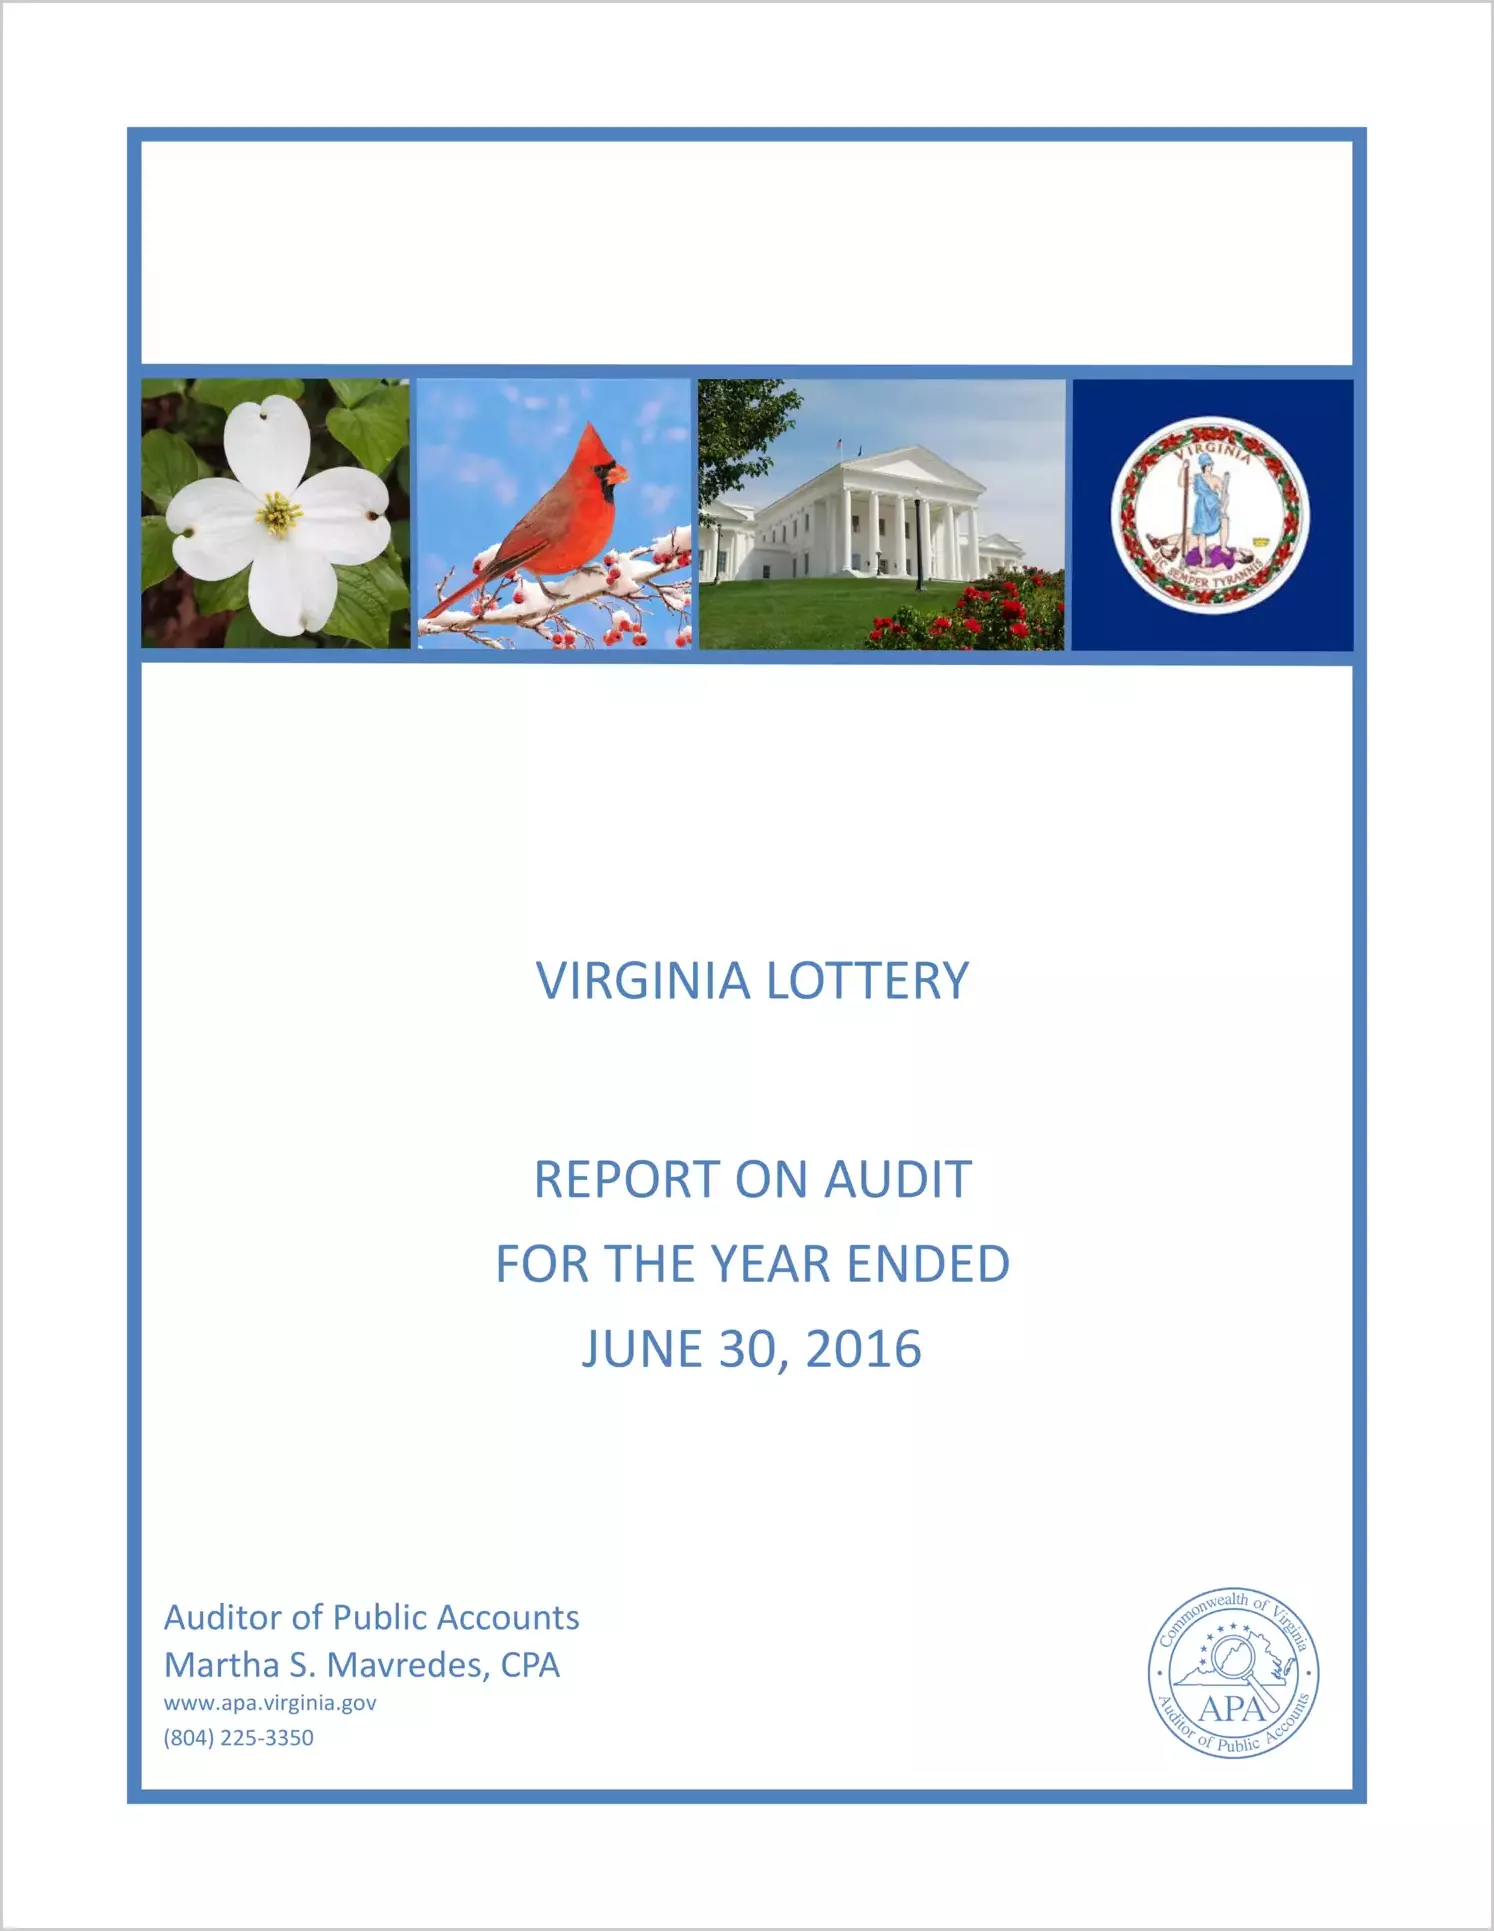 Virginia Lottery Report on Audit for the year ended June 30, 2016